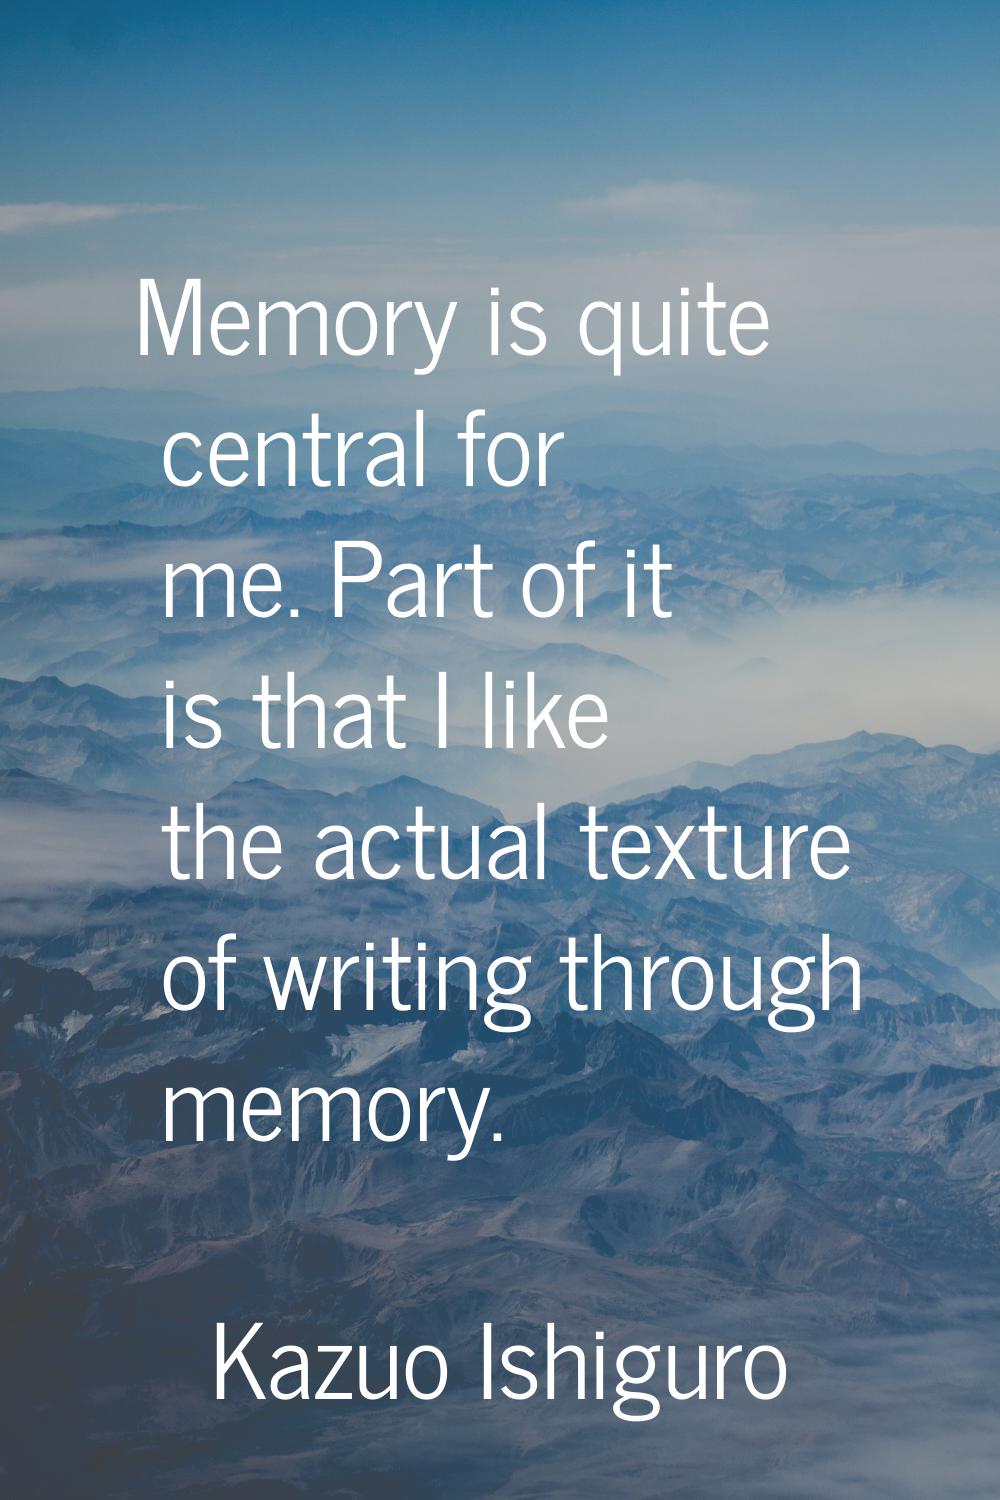 Memory is quite central for me. Part of it is that I like the actual texture of writing through mem